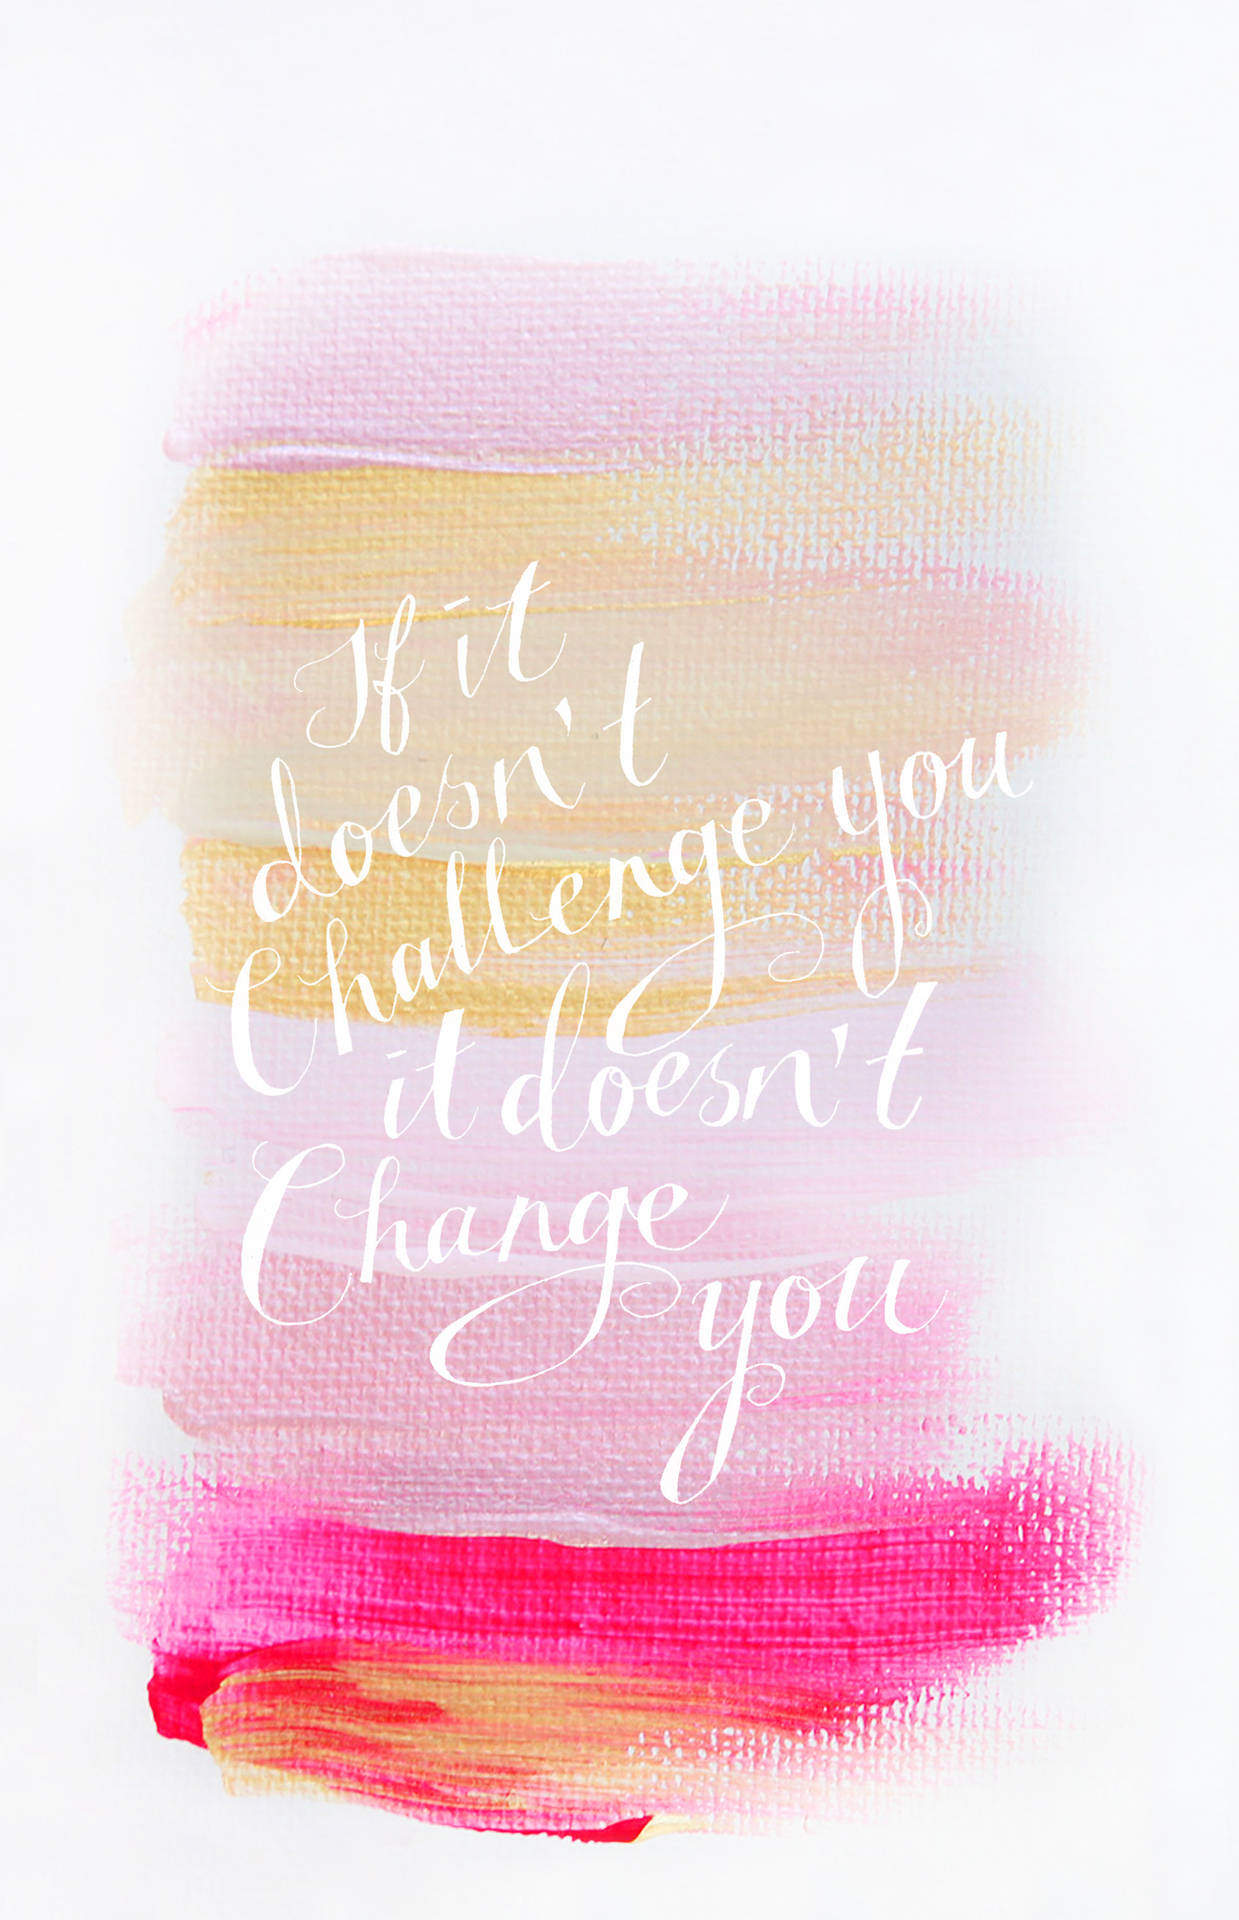 Aesthetic Yellow And Pink Cute Positive Quotes Wallpaper